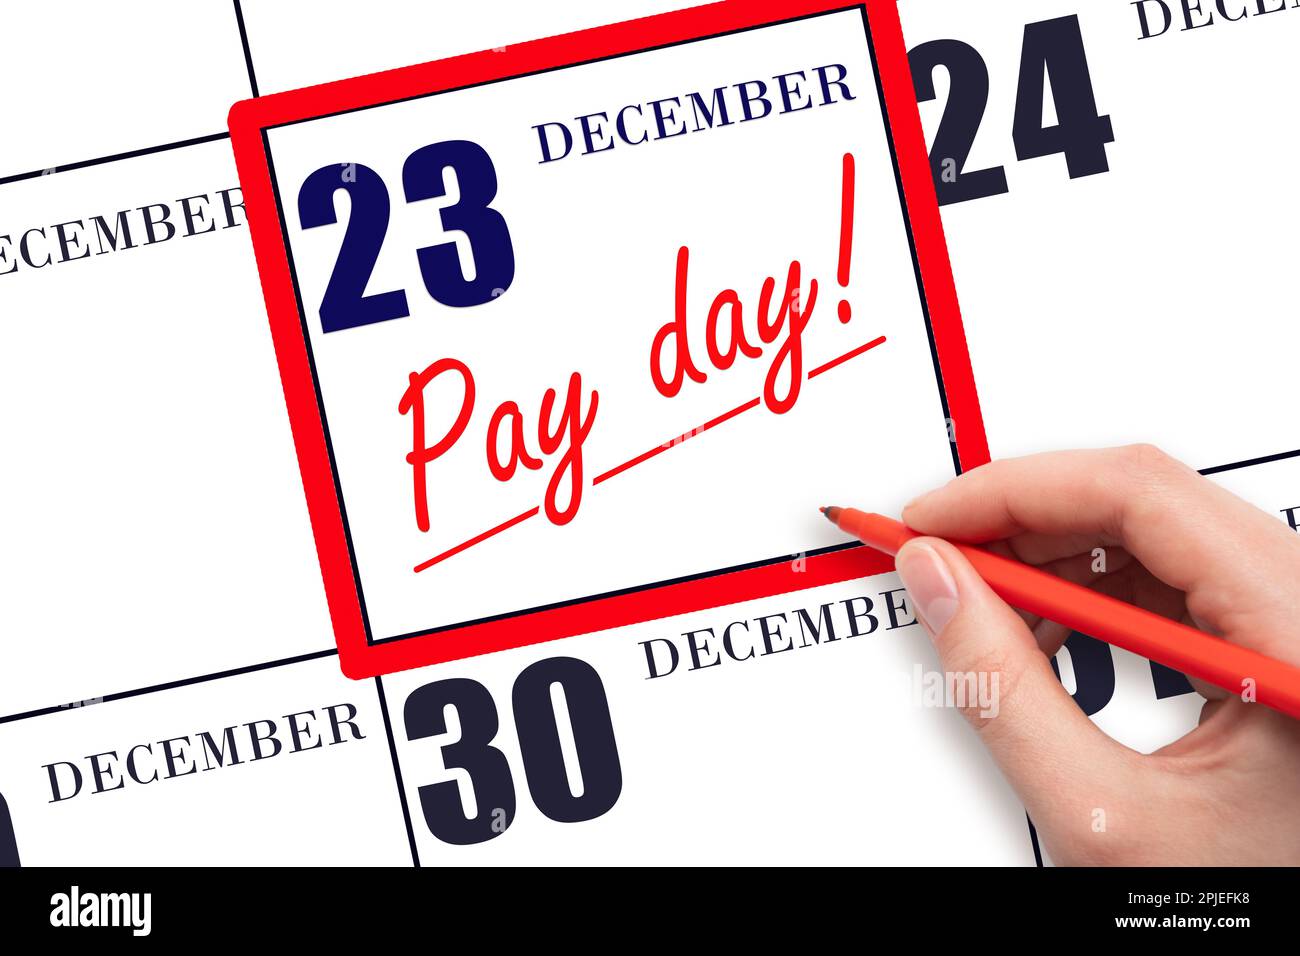 23rd day of December. Hand writing text PAY DATE on calendar date December 23 and underline it. Payment due date. Reminder concept of payment. Winter Stock Photo